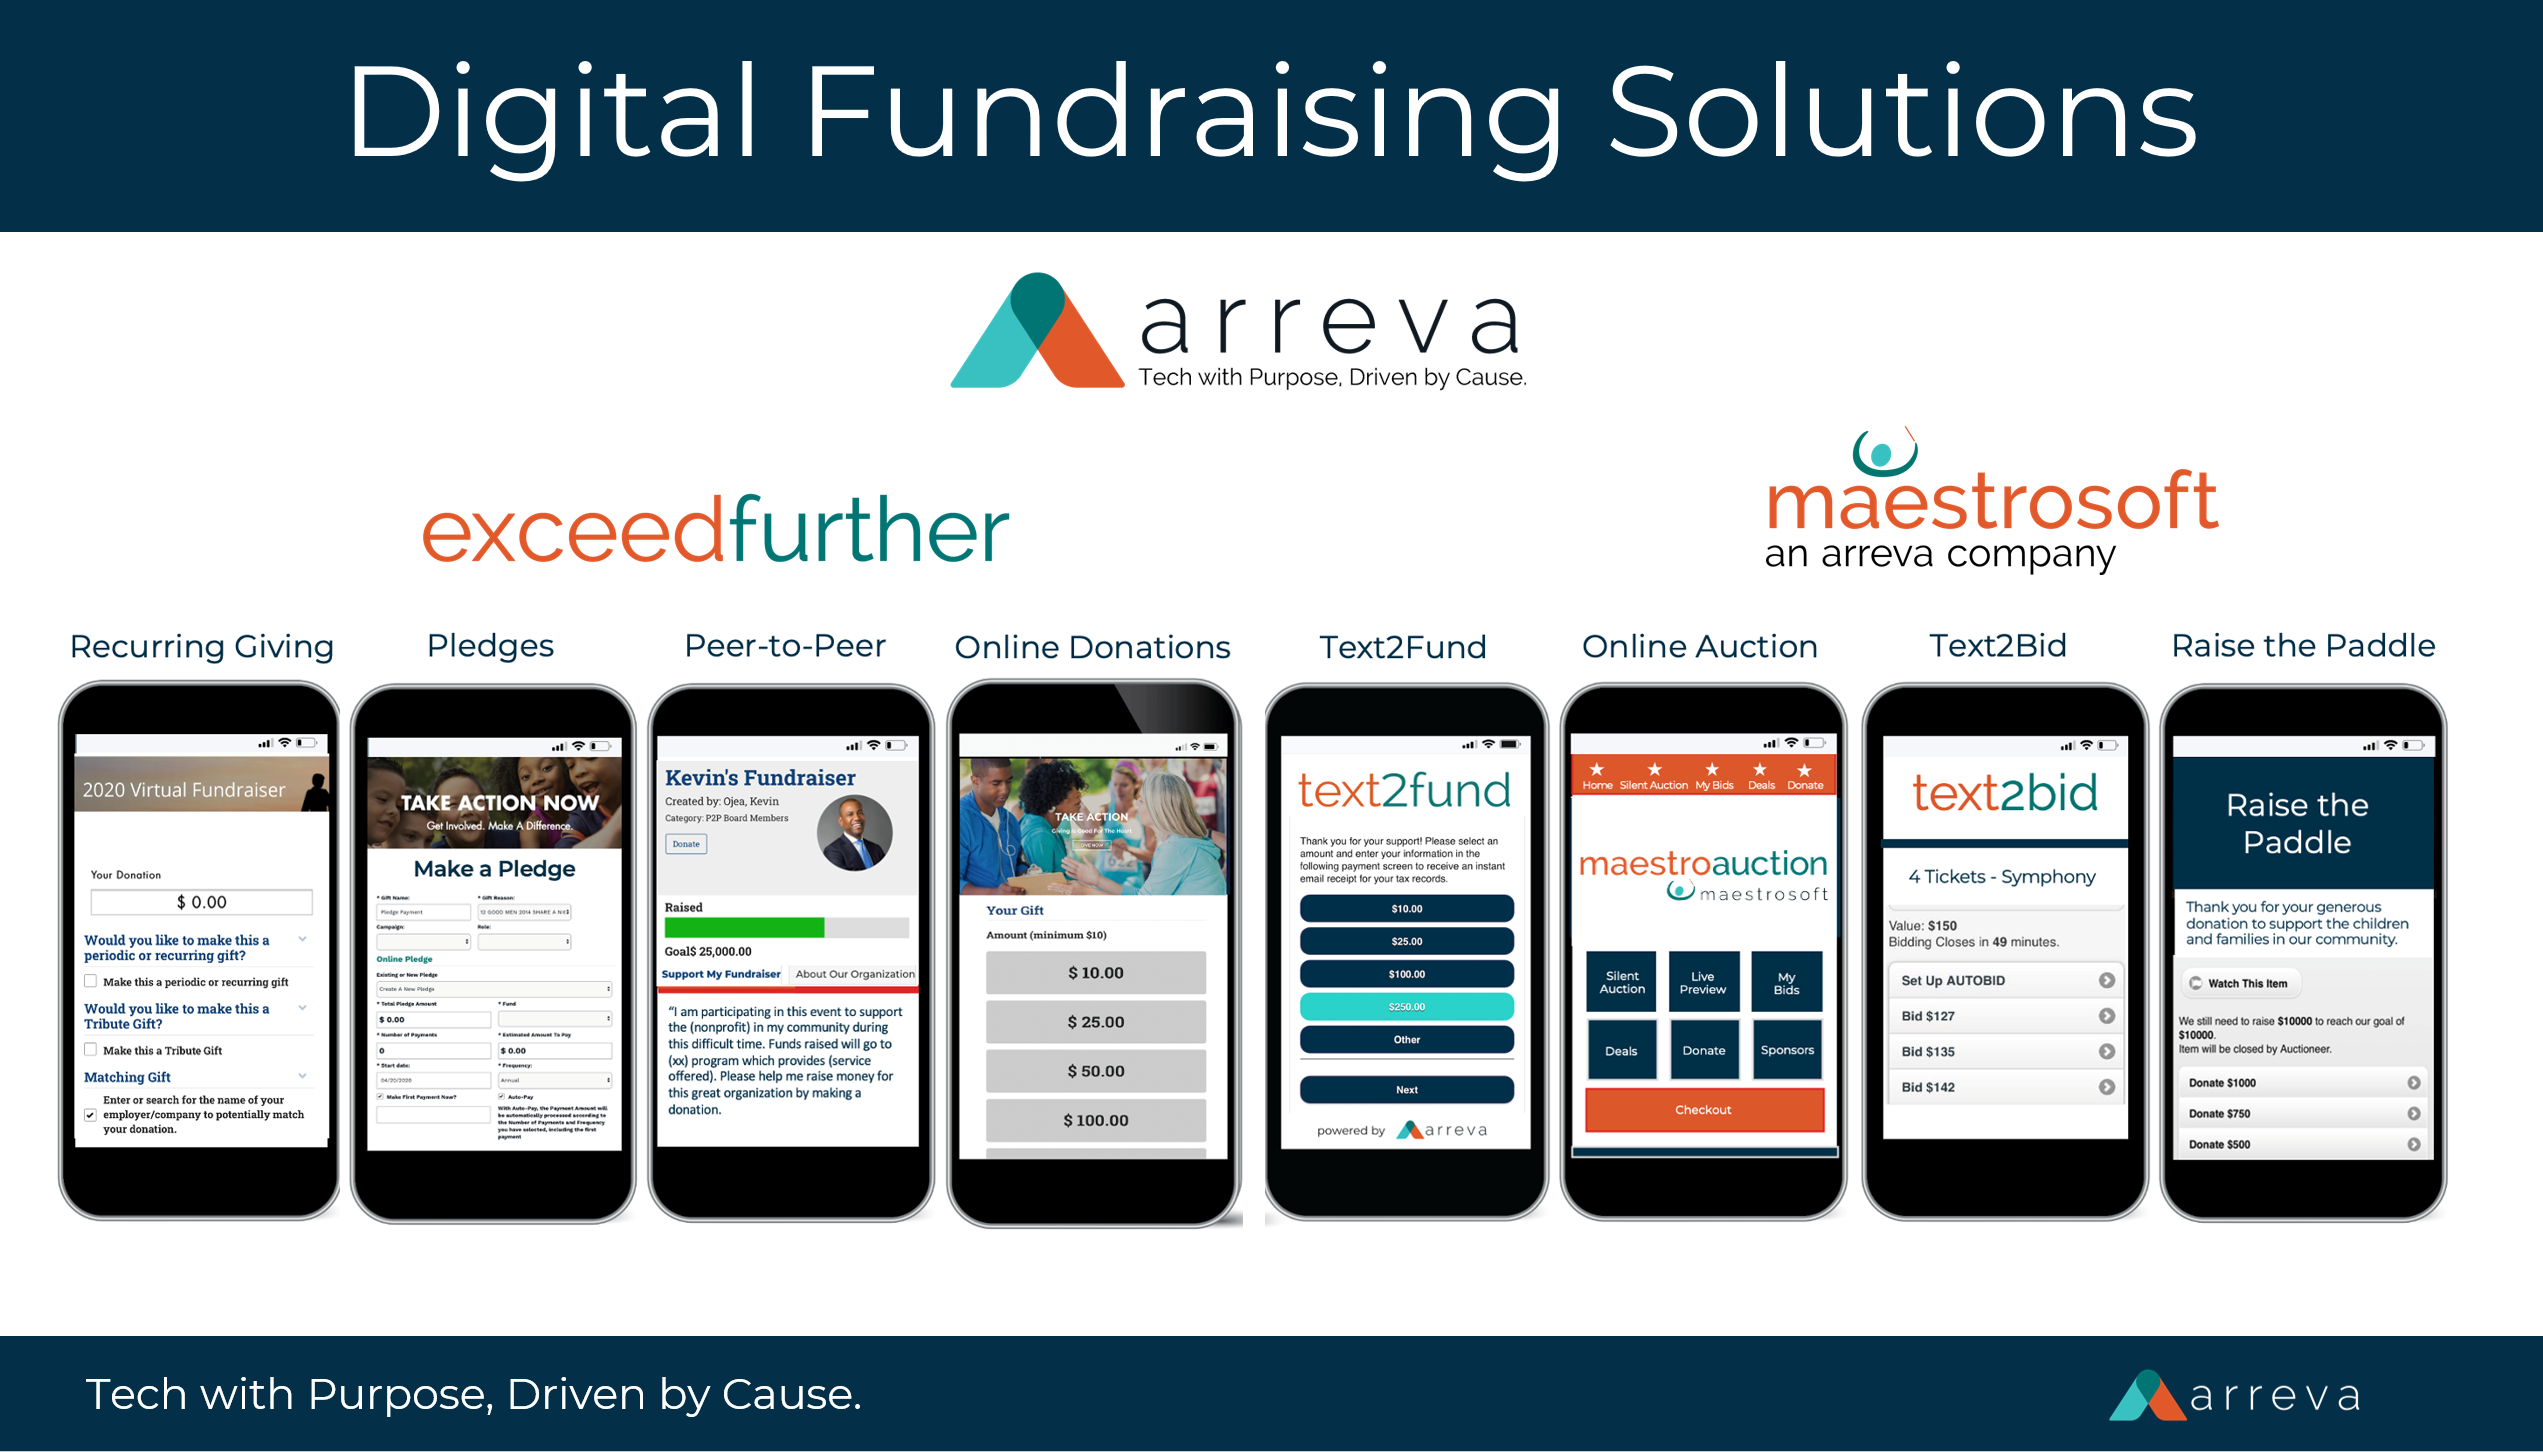 Arreva Digital Fundraising Solutions: ExceedFurther and MaestroSoft Suite of Digital Auction and Fundraising Software